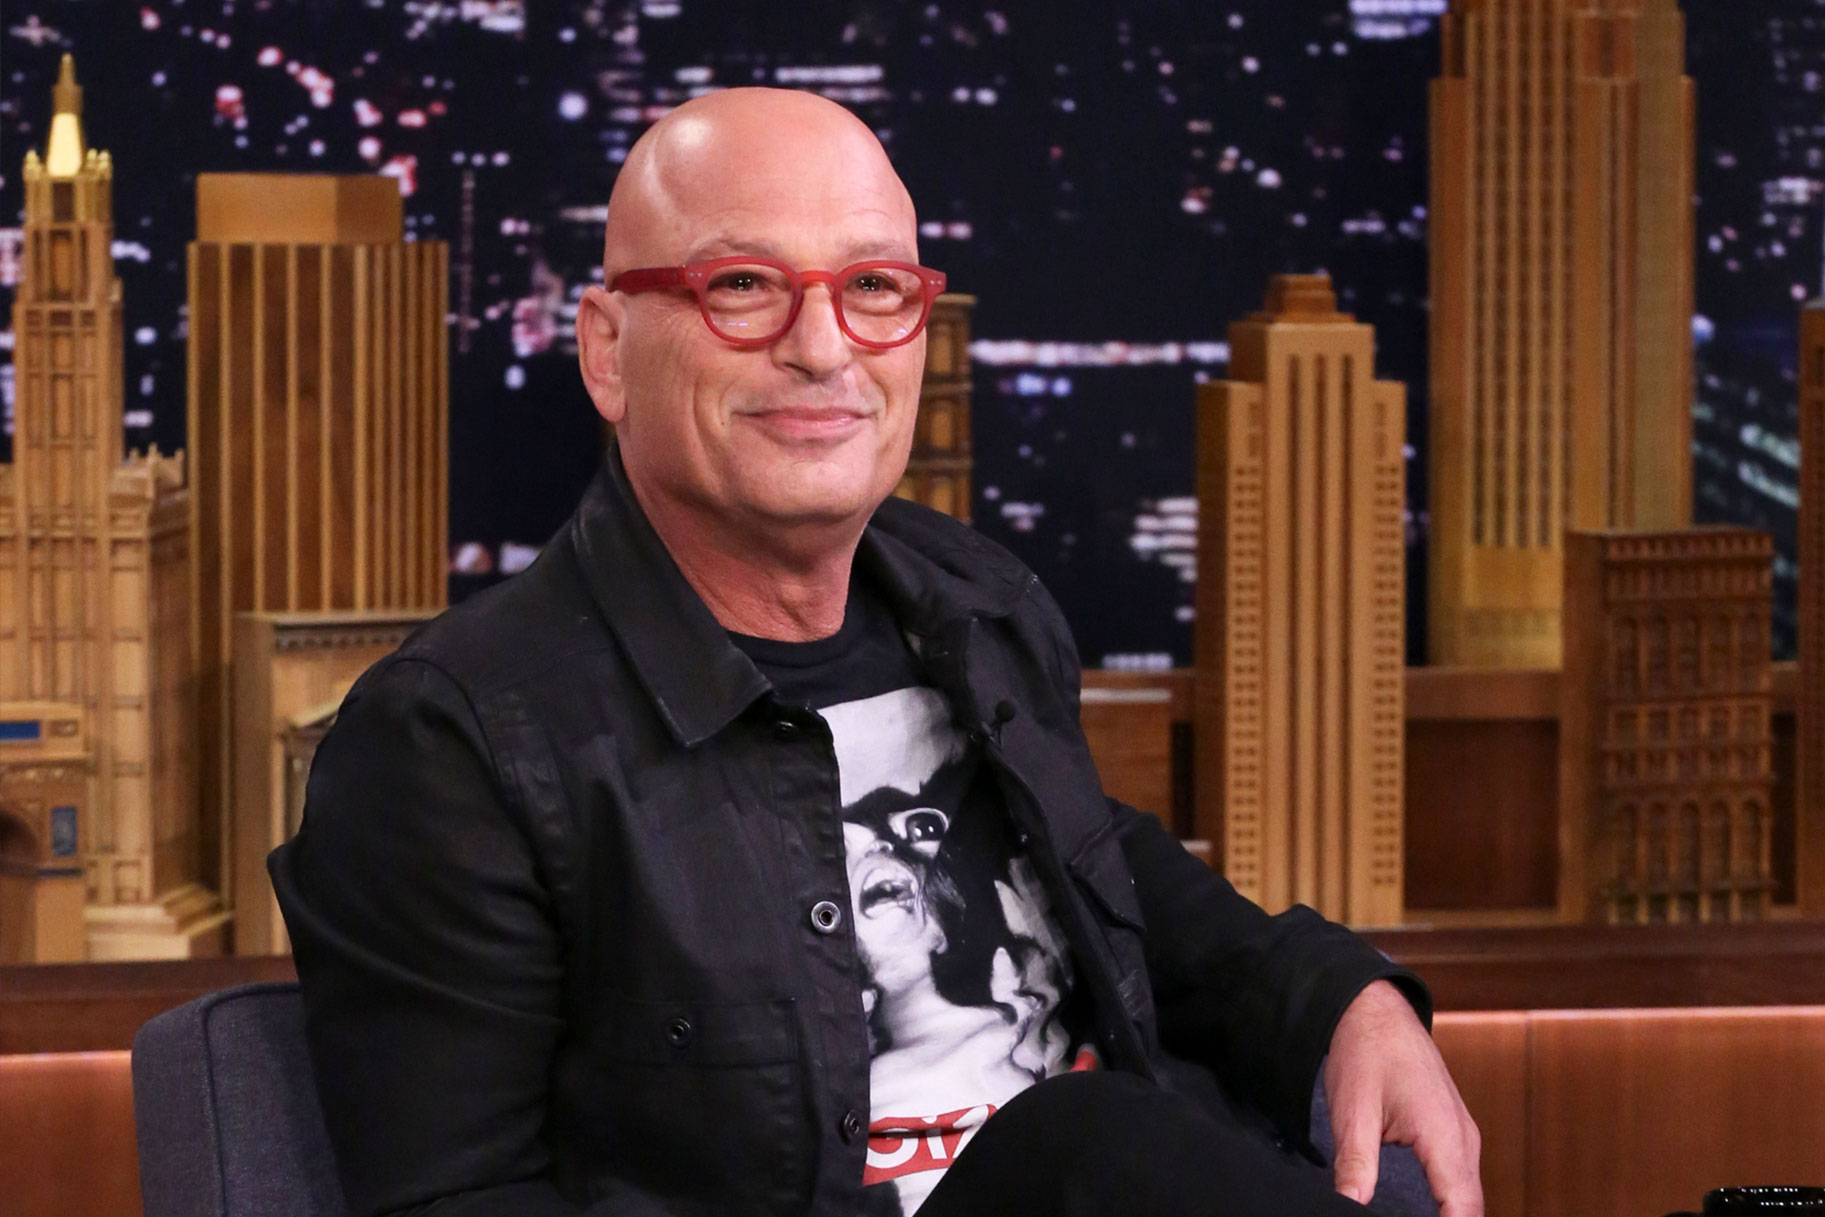 Howie Mandel On The Tonight Show